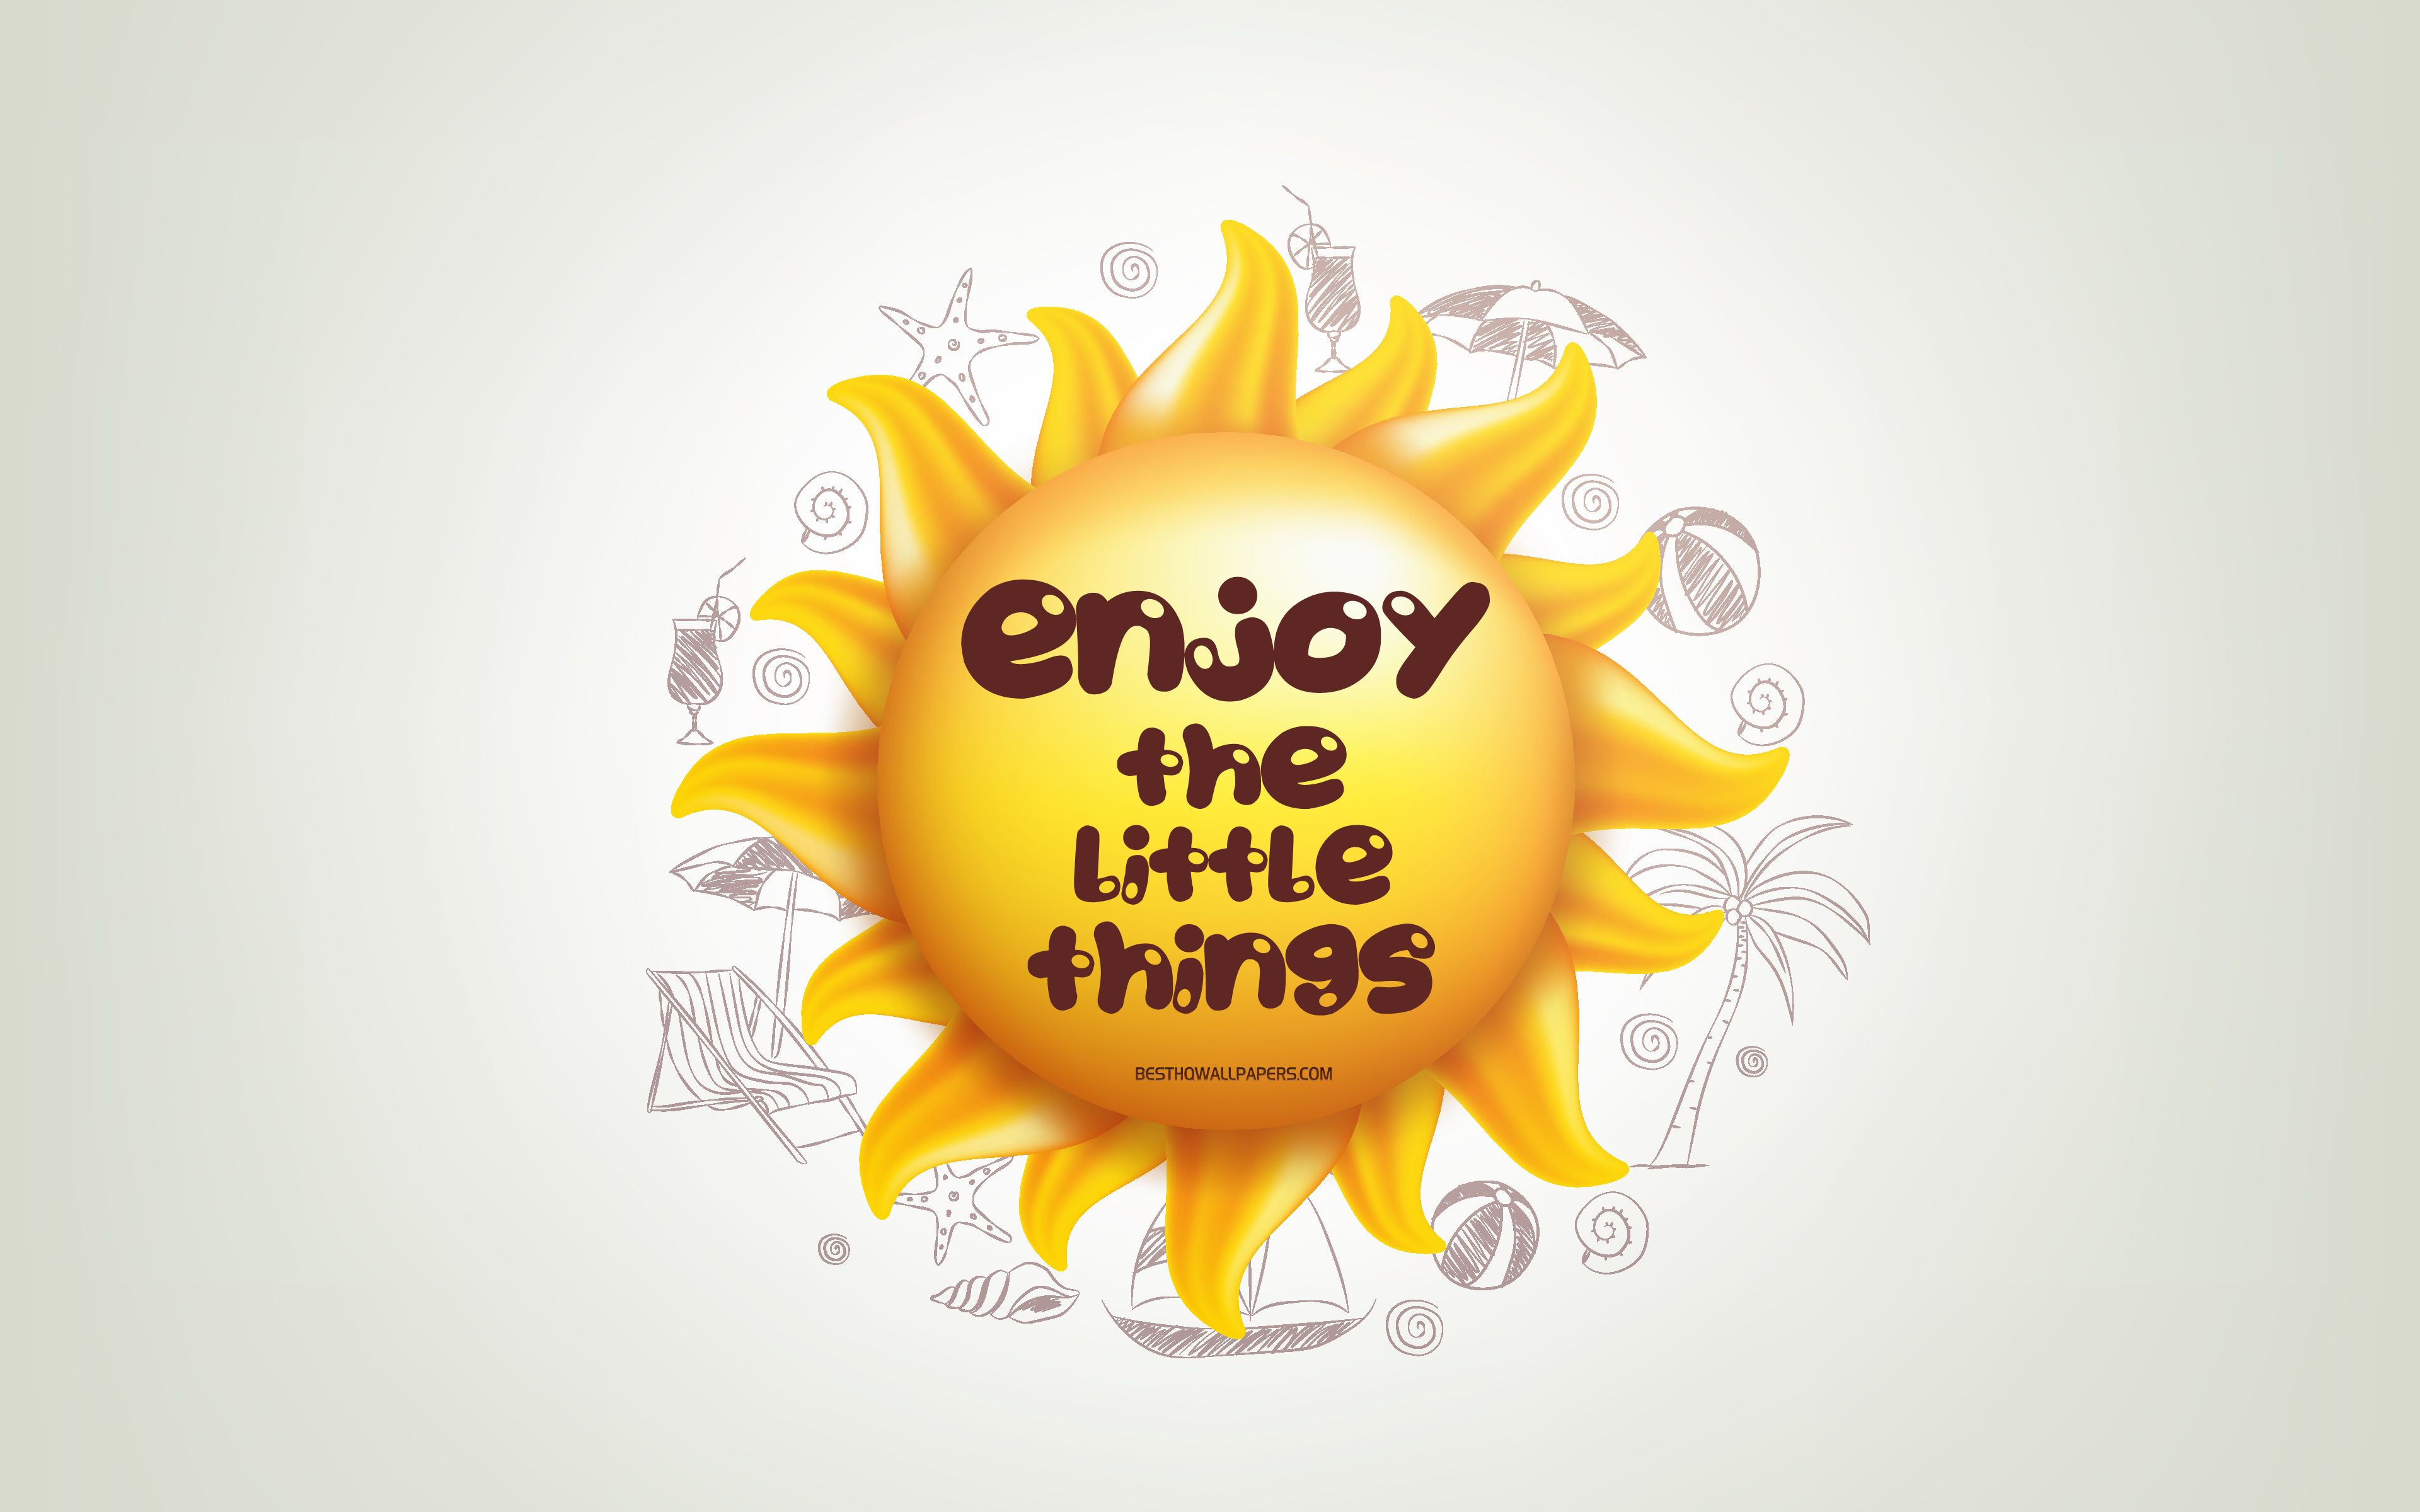 Download wallpaper Enjoy the little things, 3D sun, positive quotes, 3D art, Enjoy the little things concepts, creative art, wish for a day, quotes about little things for desktop with resolution 3840x2400